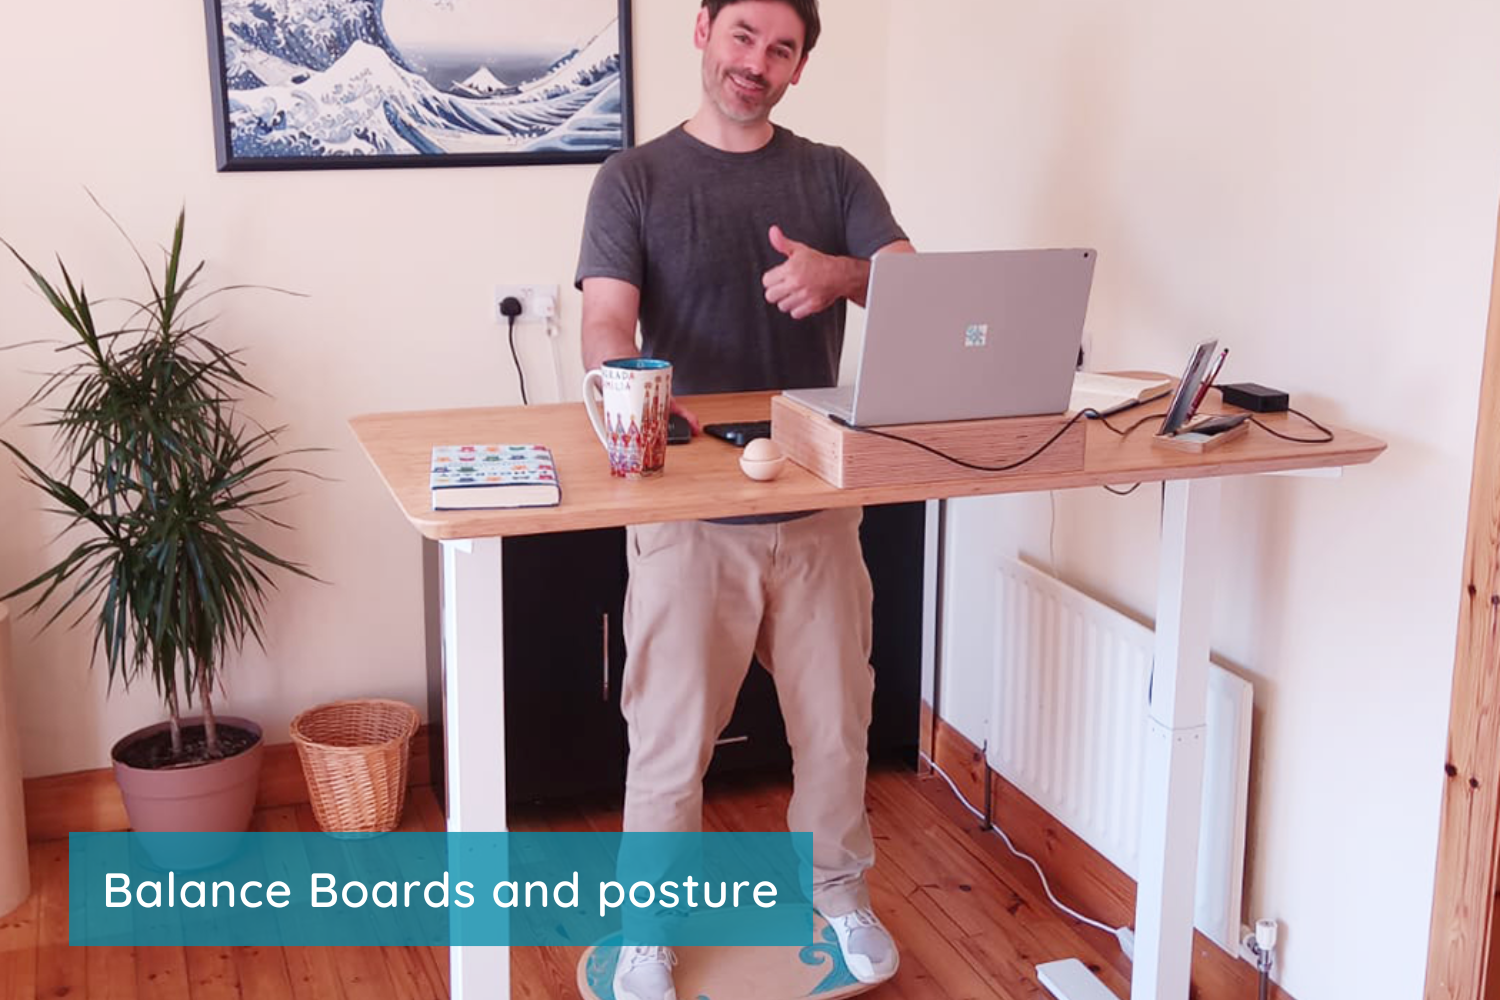 How Balance Boards can help bad posture